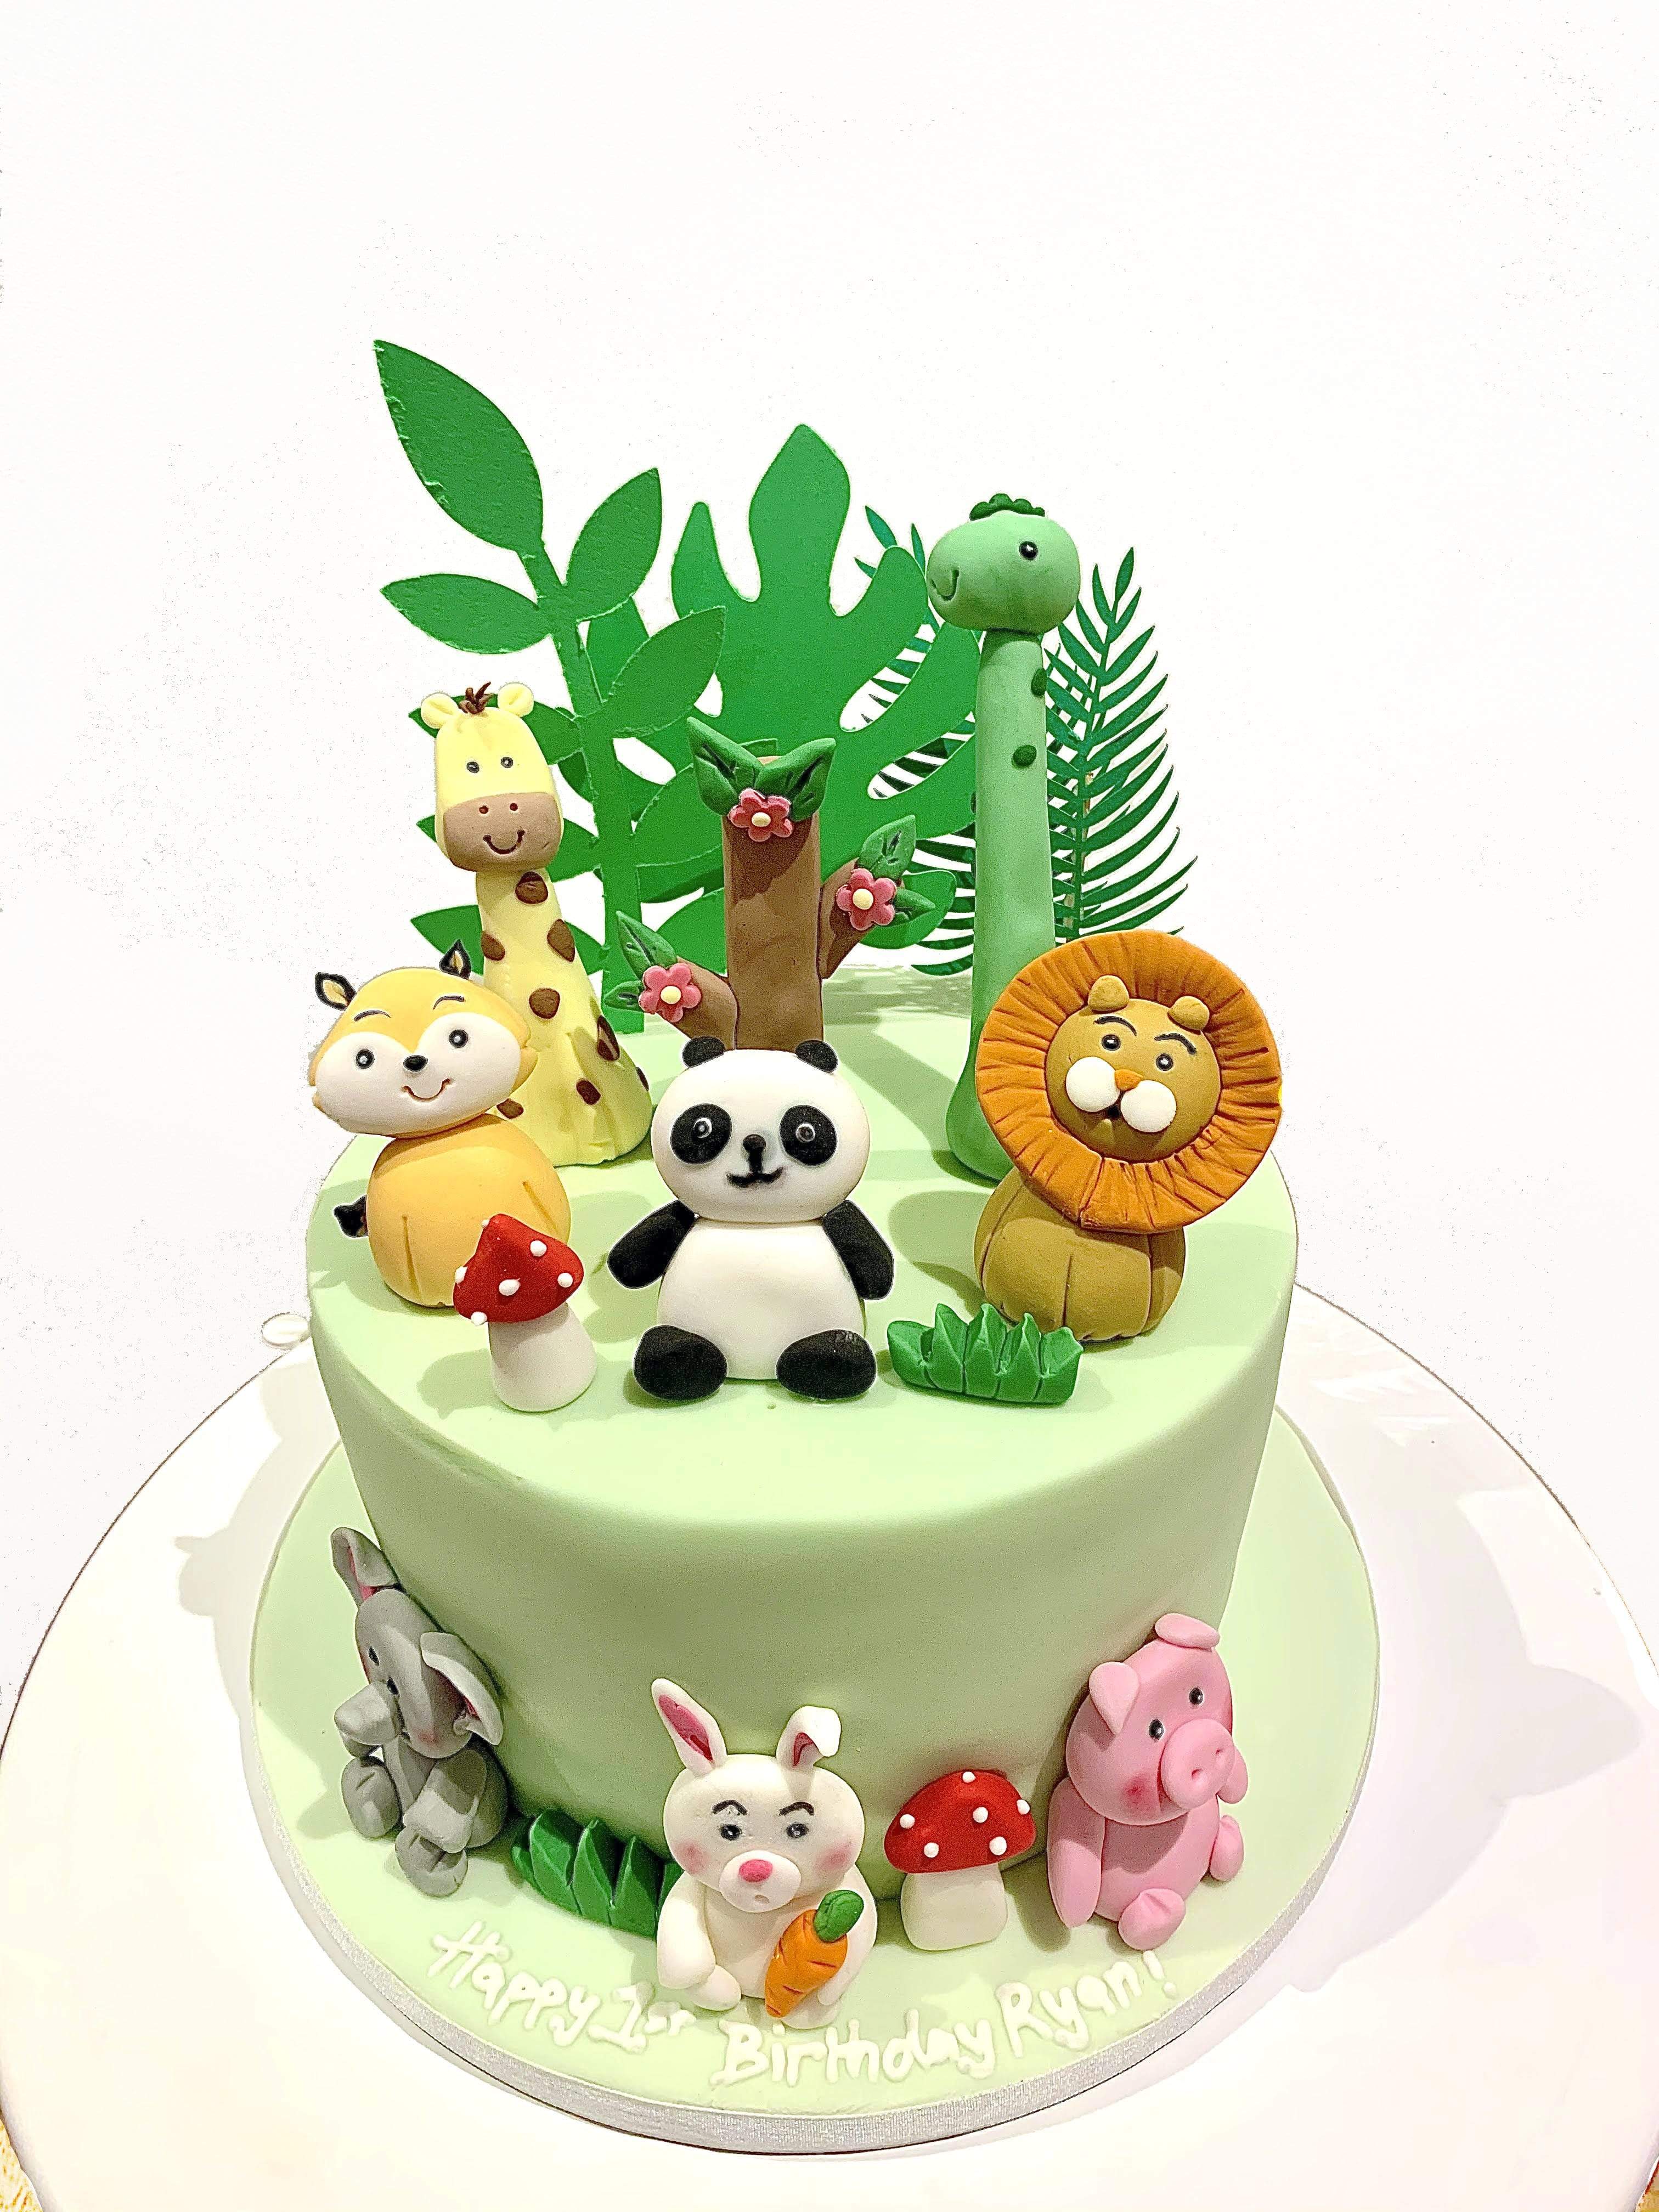 Details more than 80 jungle cake decorating ideas latest -  awesomeenglish.edu.vn